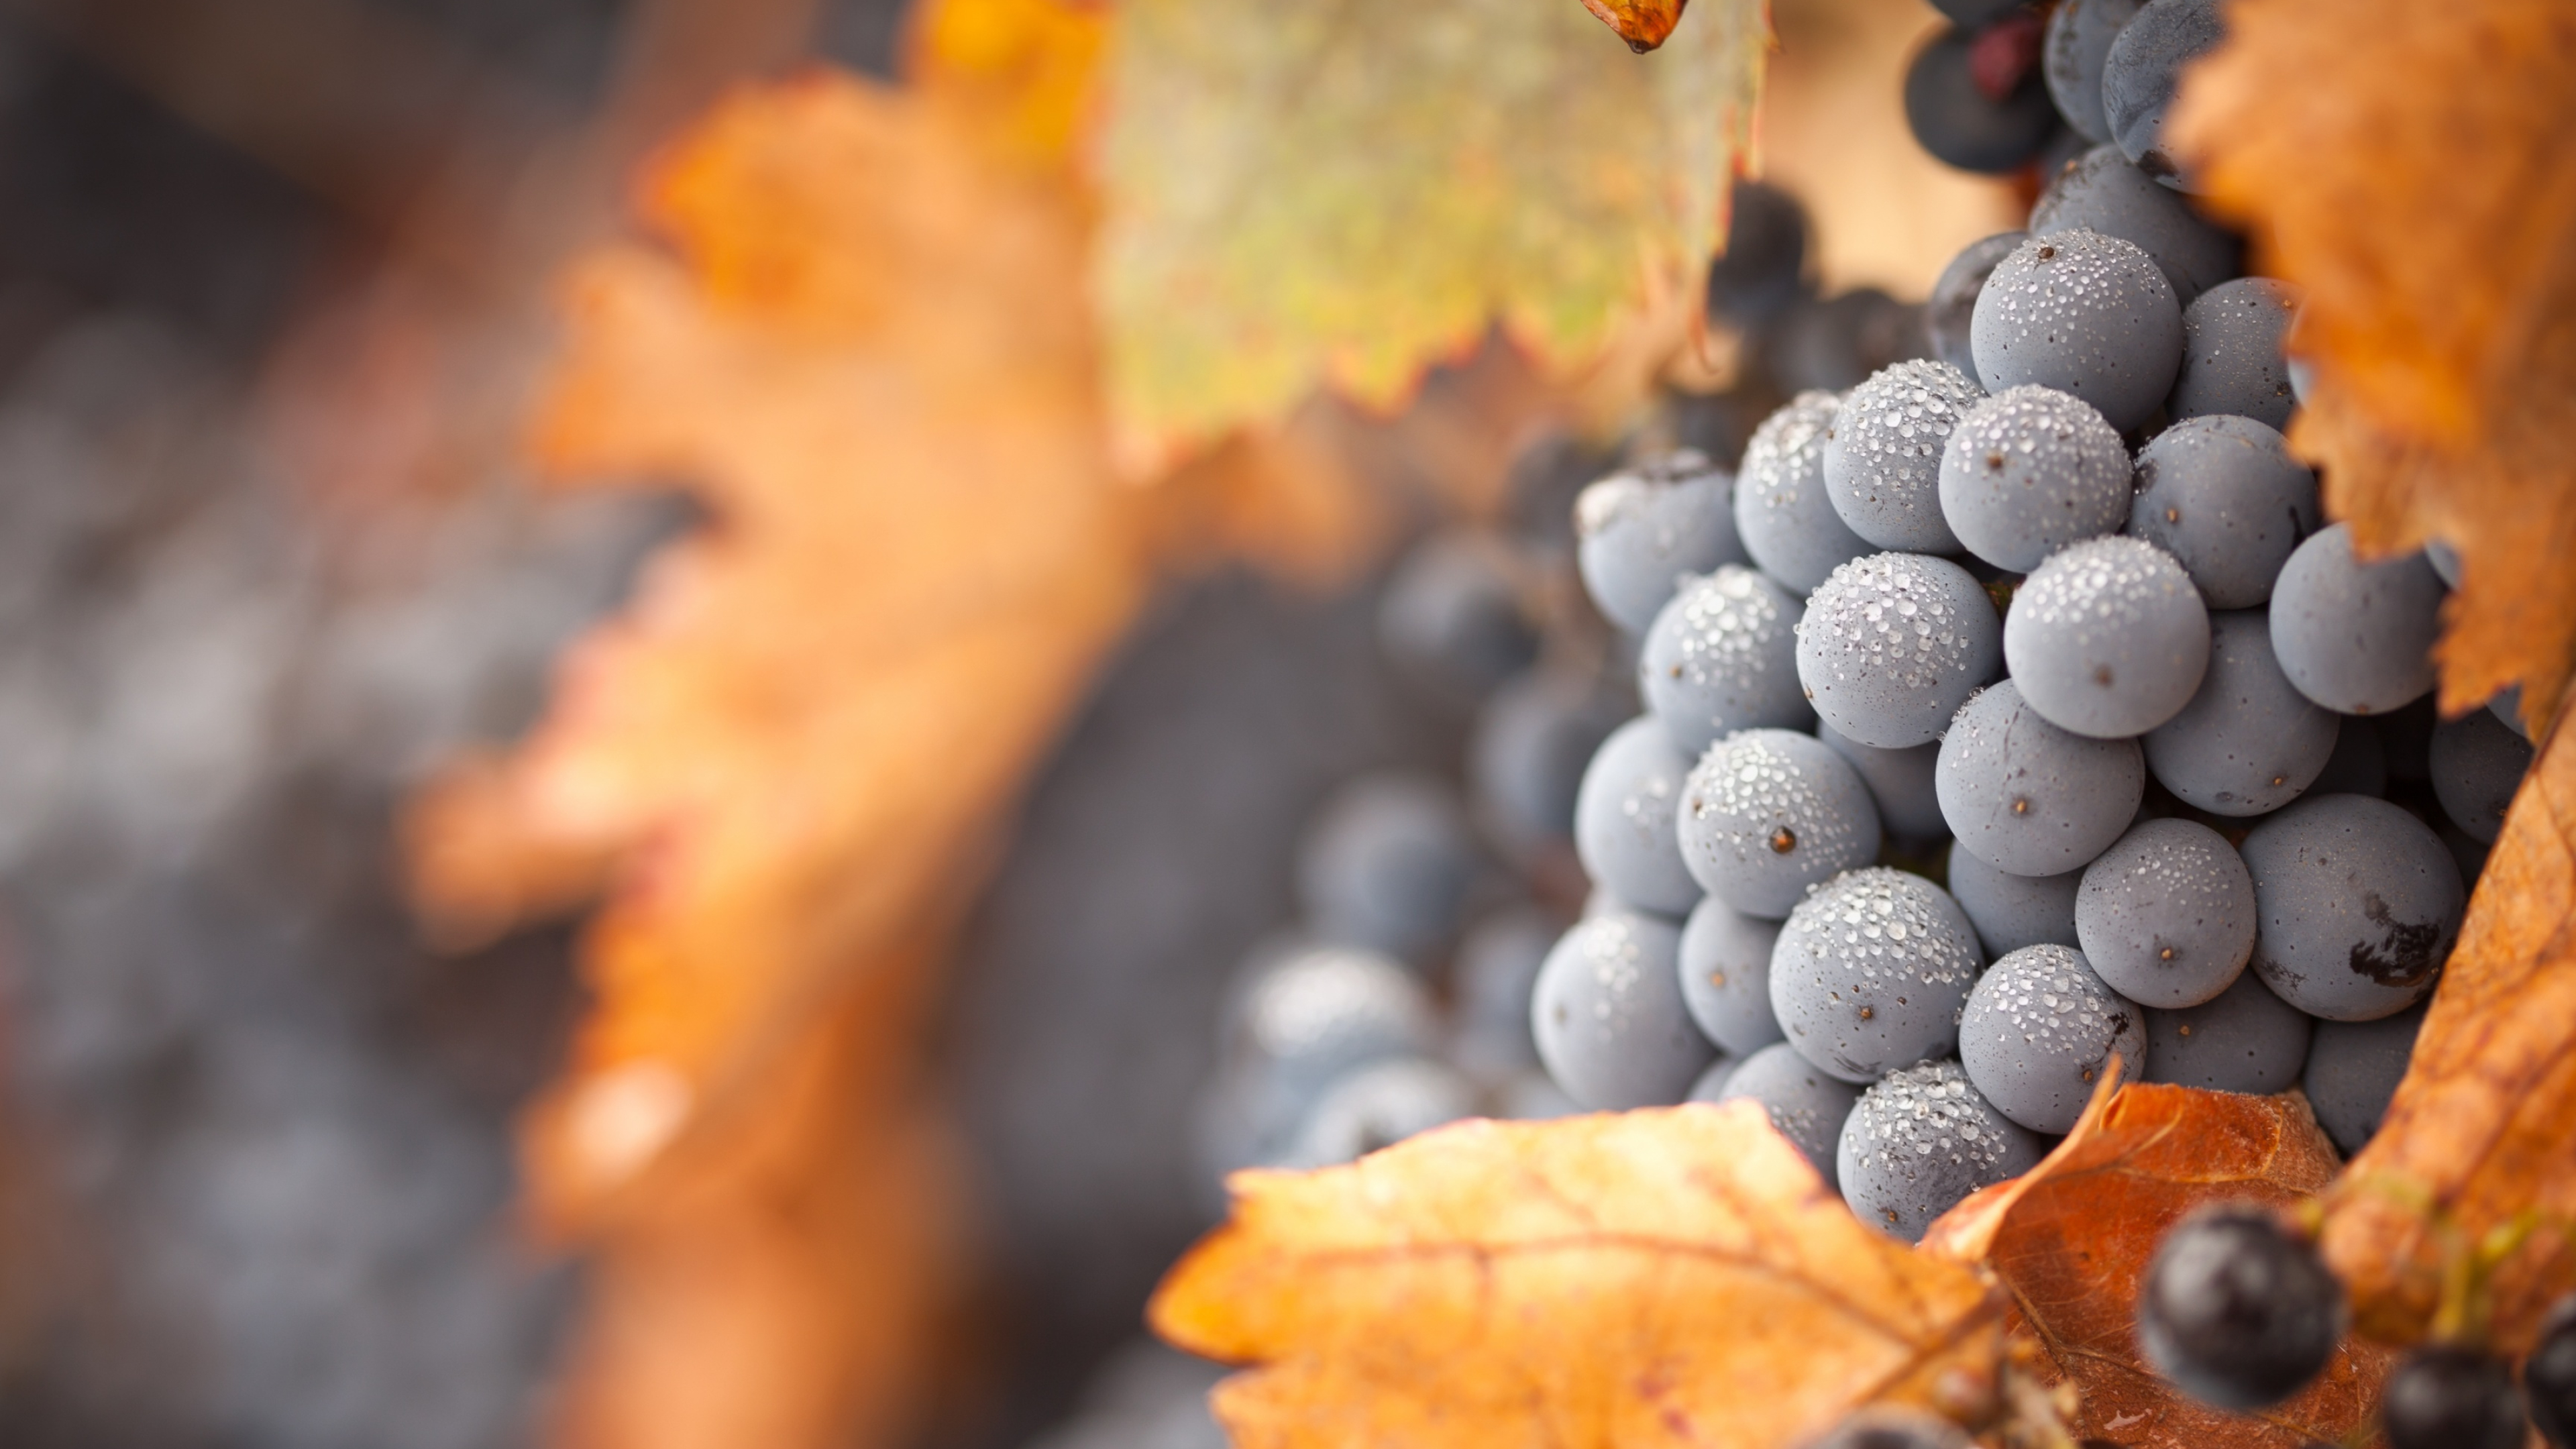 Grapes: A berry of the deciduous woody vines of the flowering plant genus Vitis. 3840x2160 4K Background.